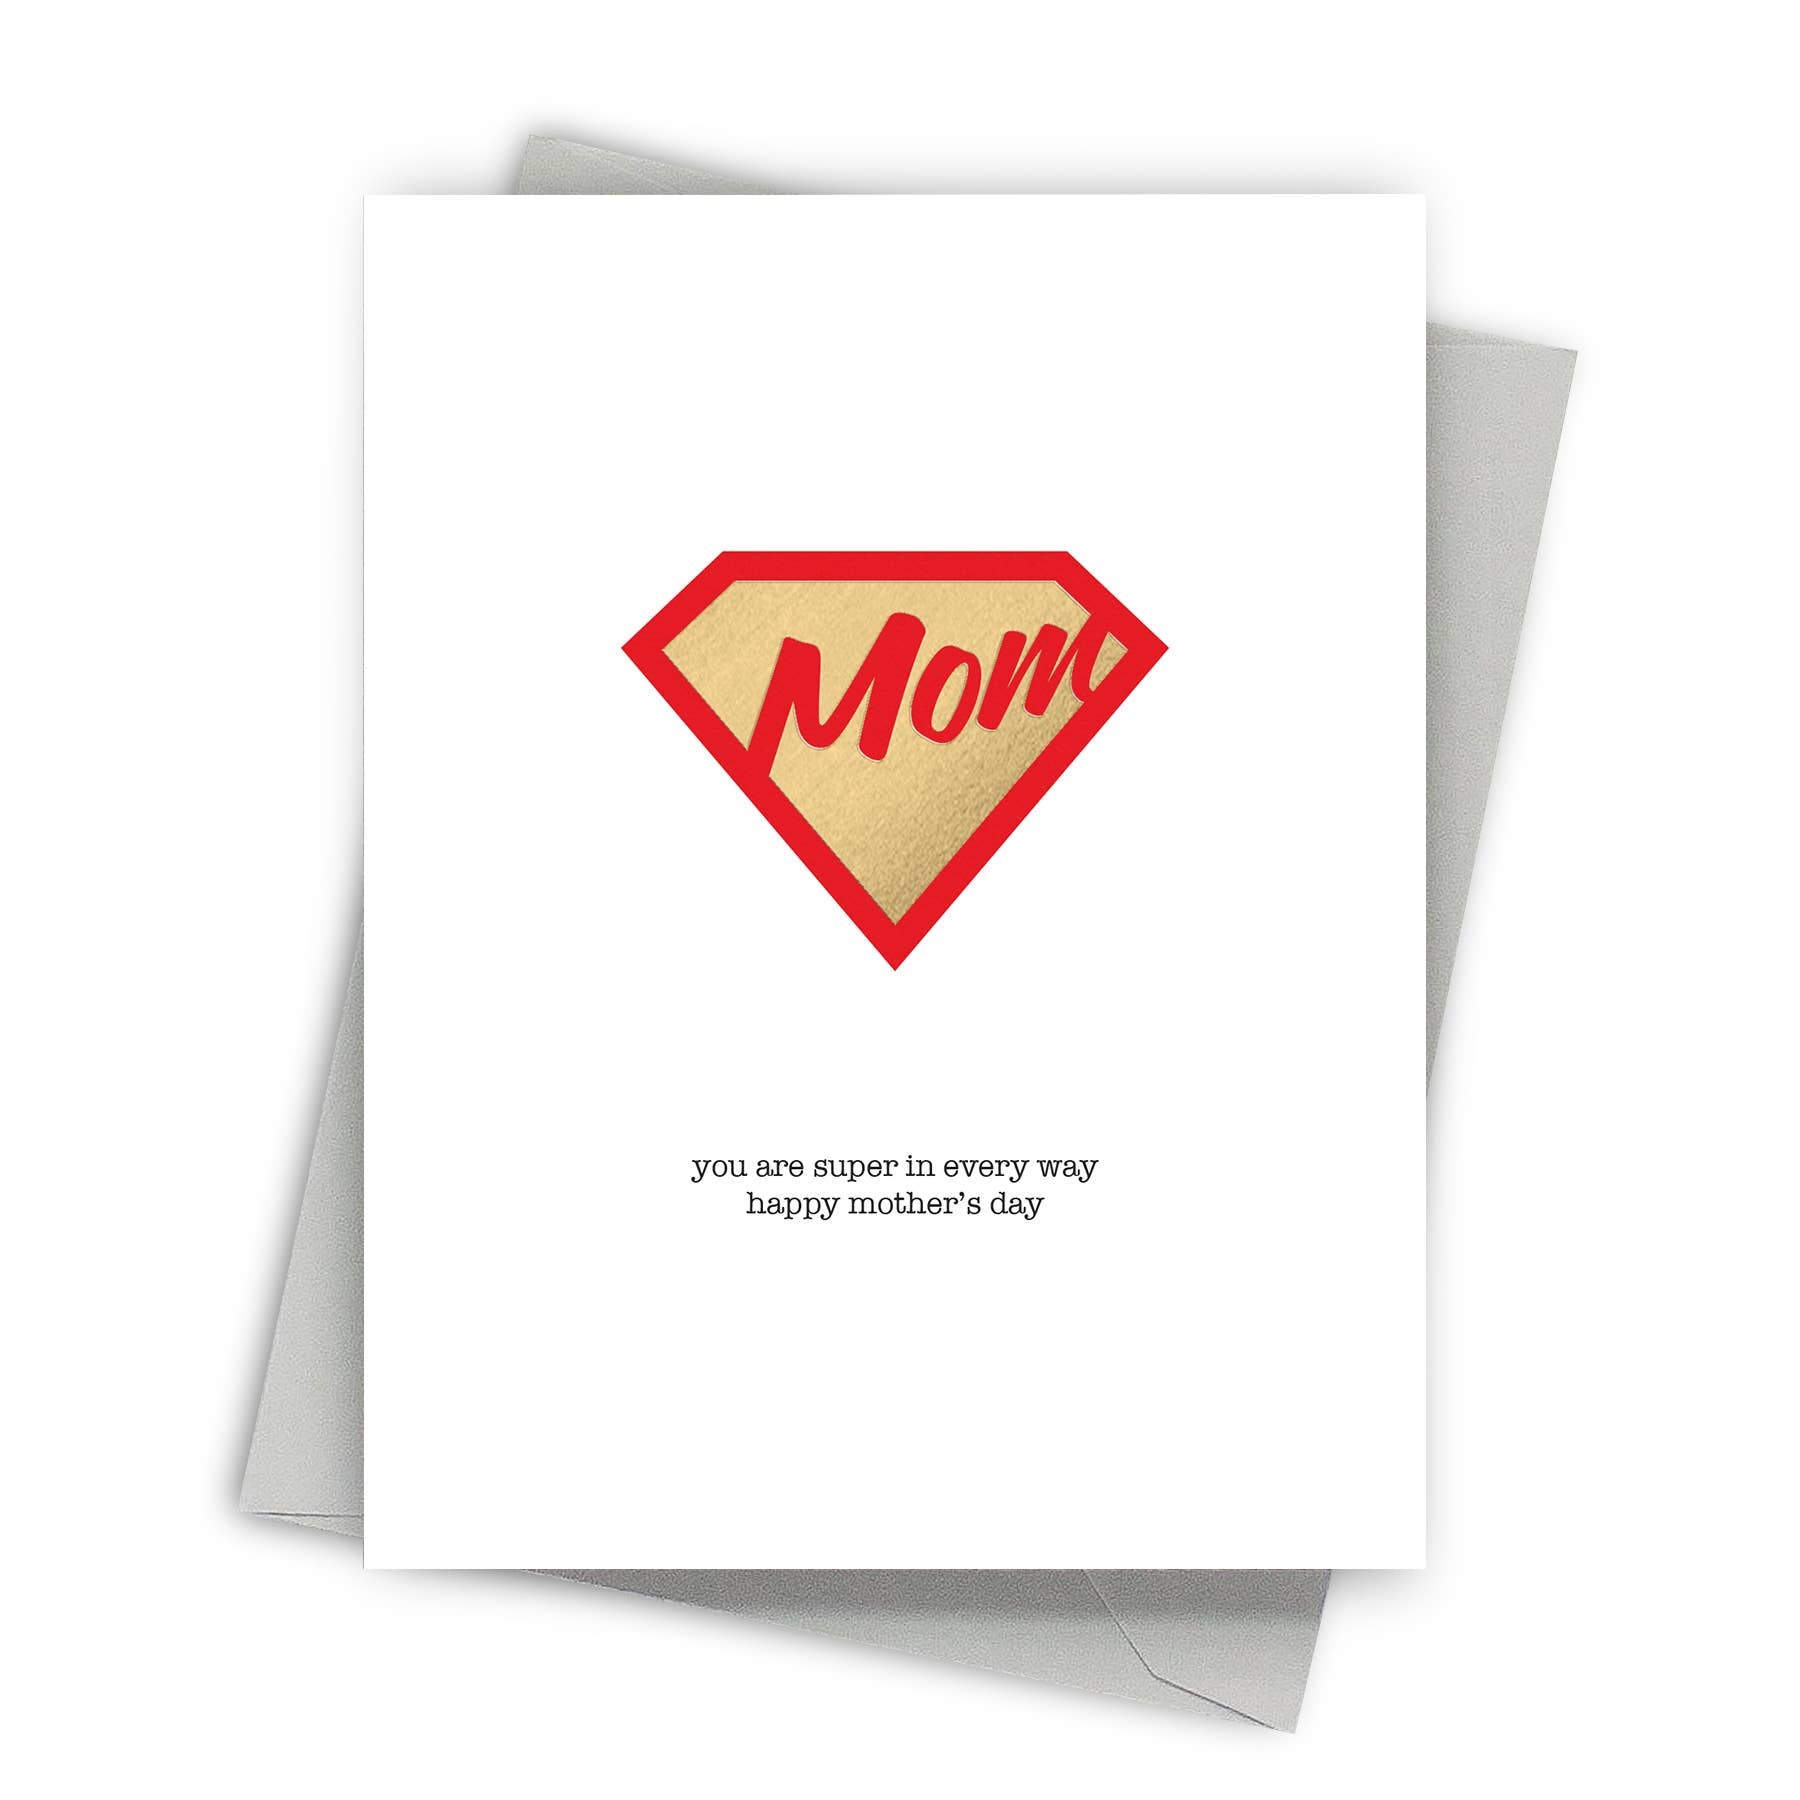 Super Mom – Mother's Day Greeting Cards